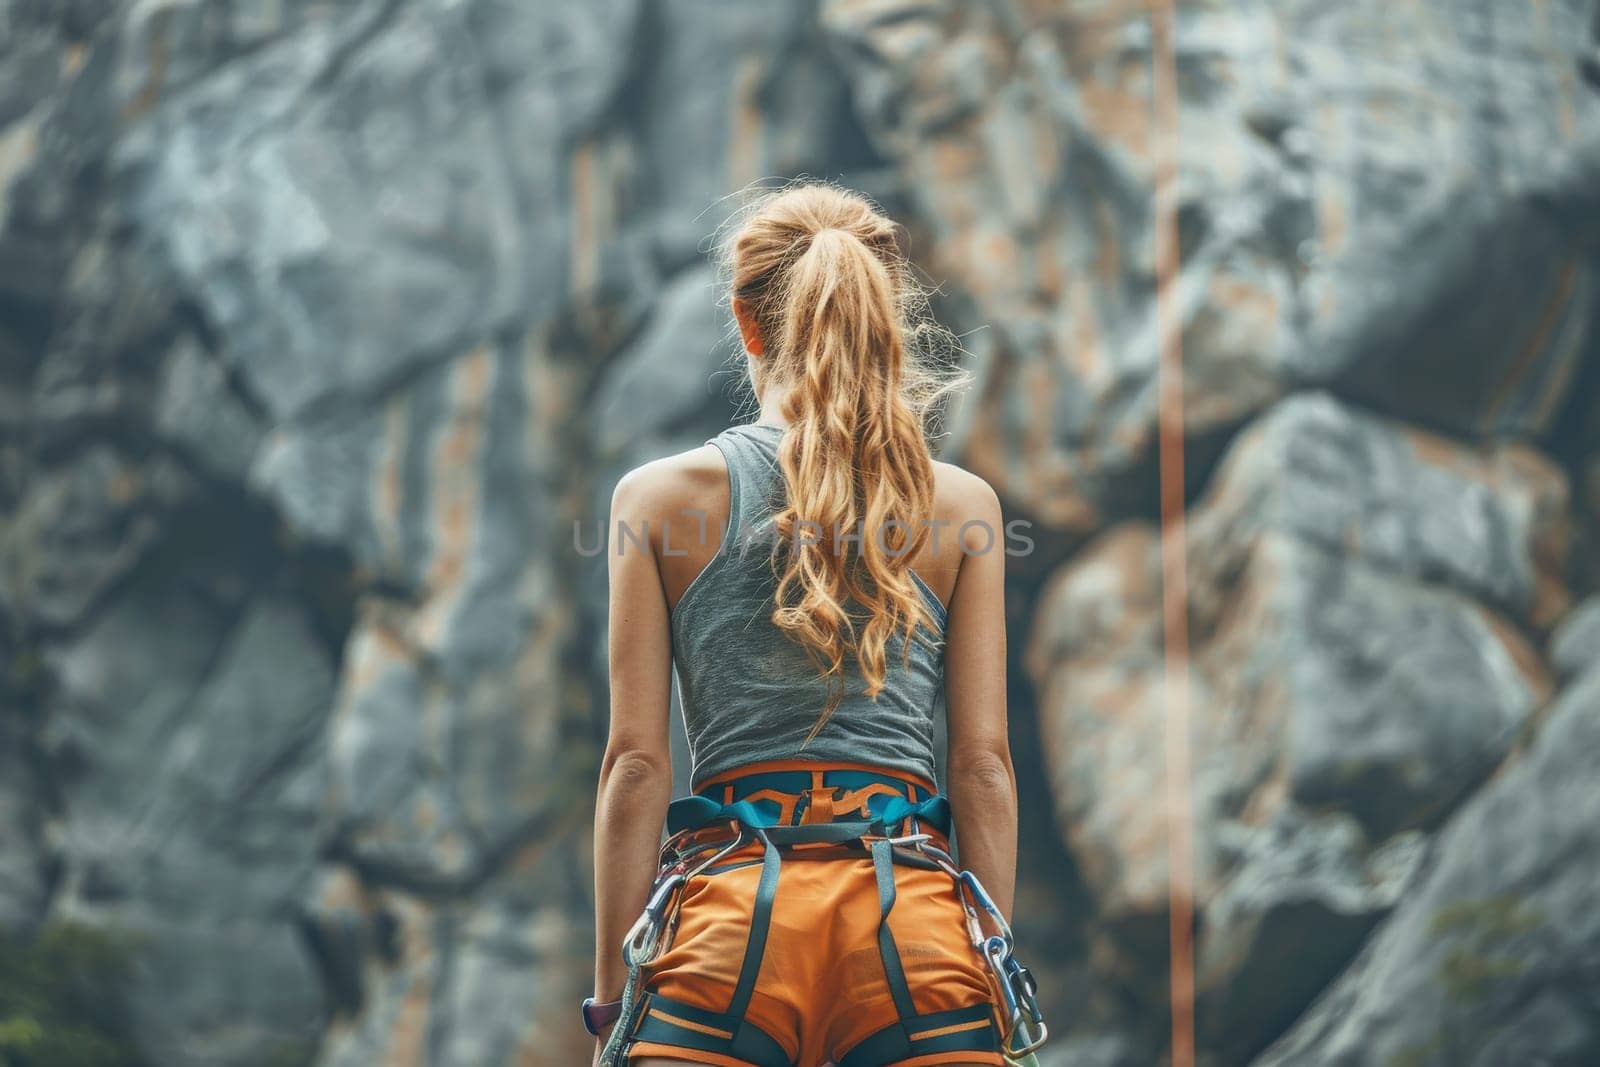 A woman with long blonde hair is standing on a rocky cliff by itchaznong